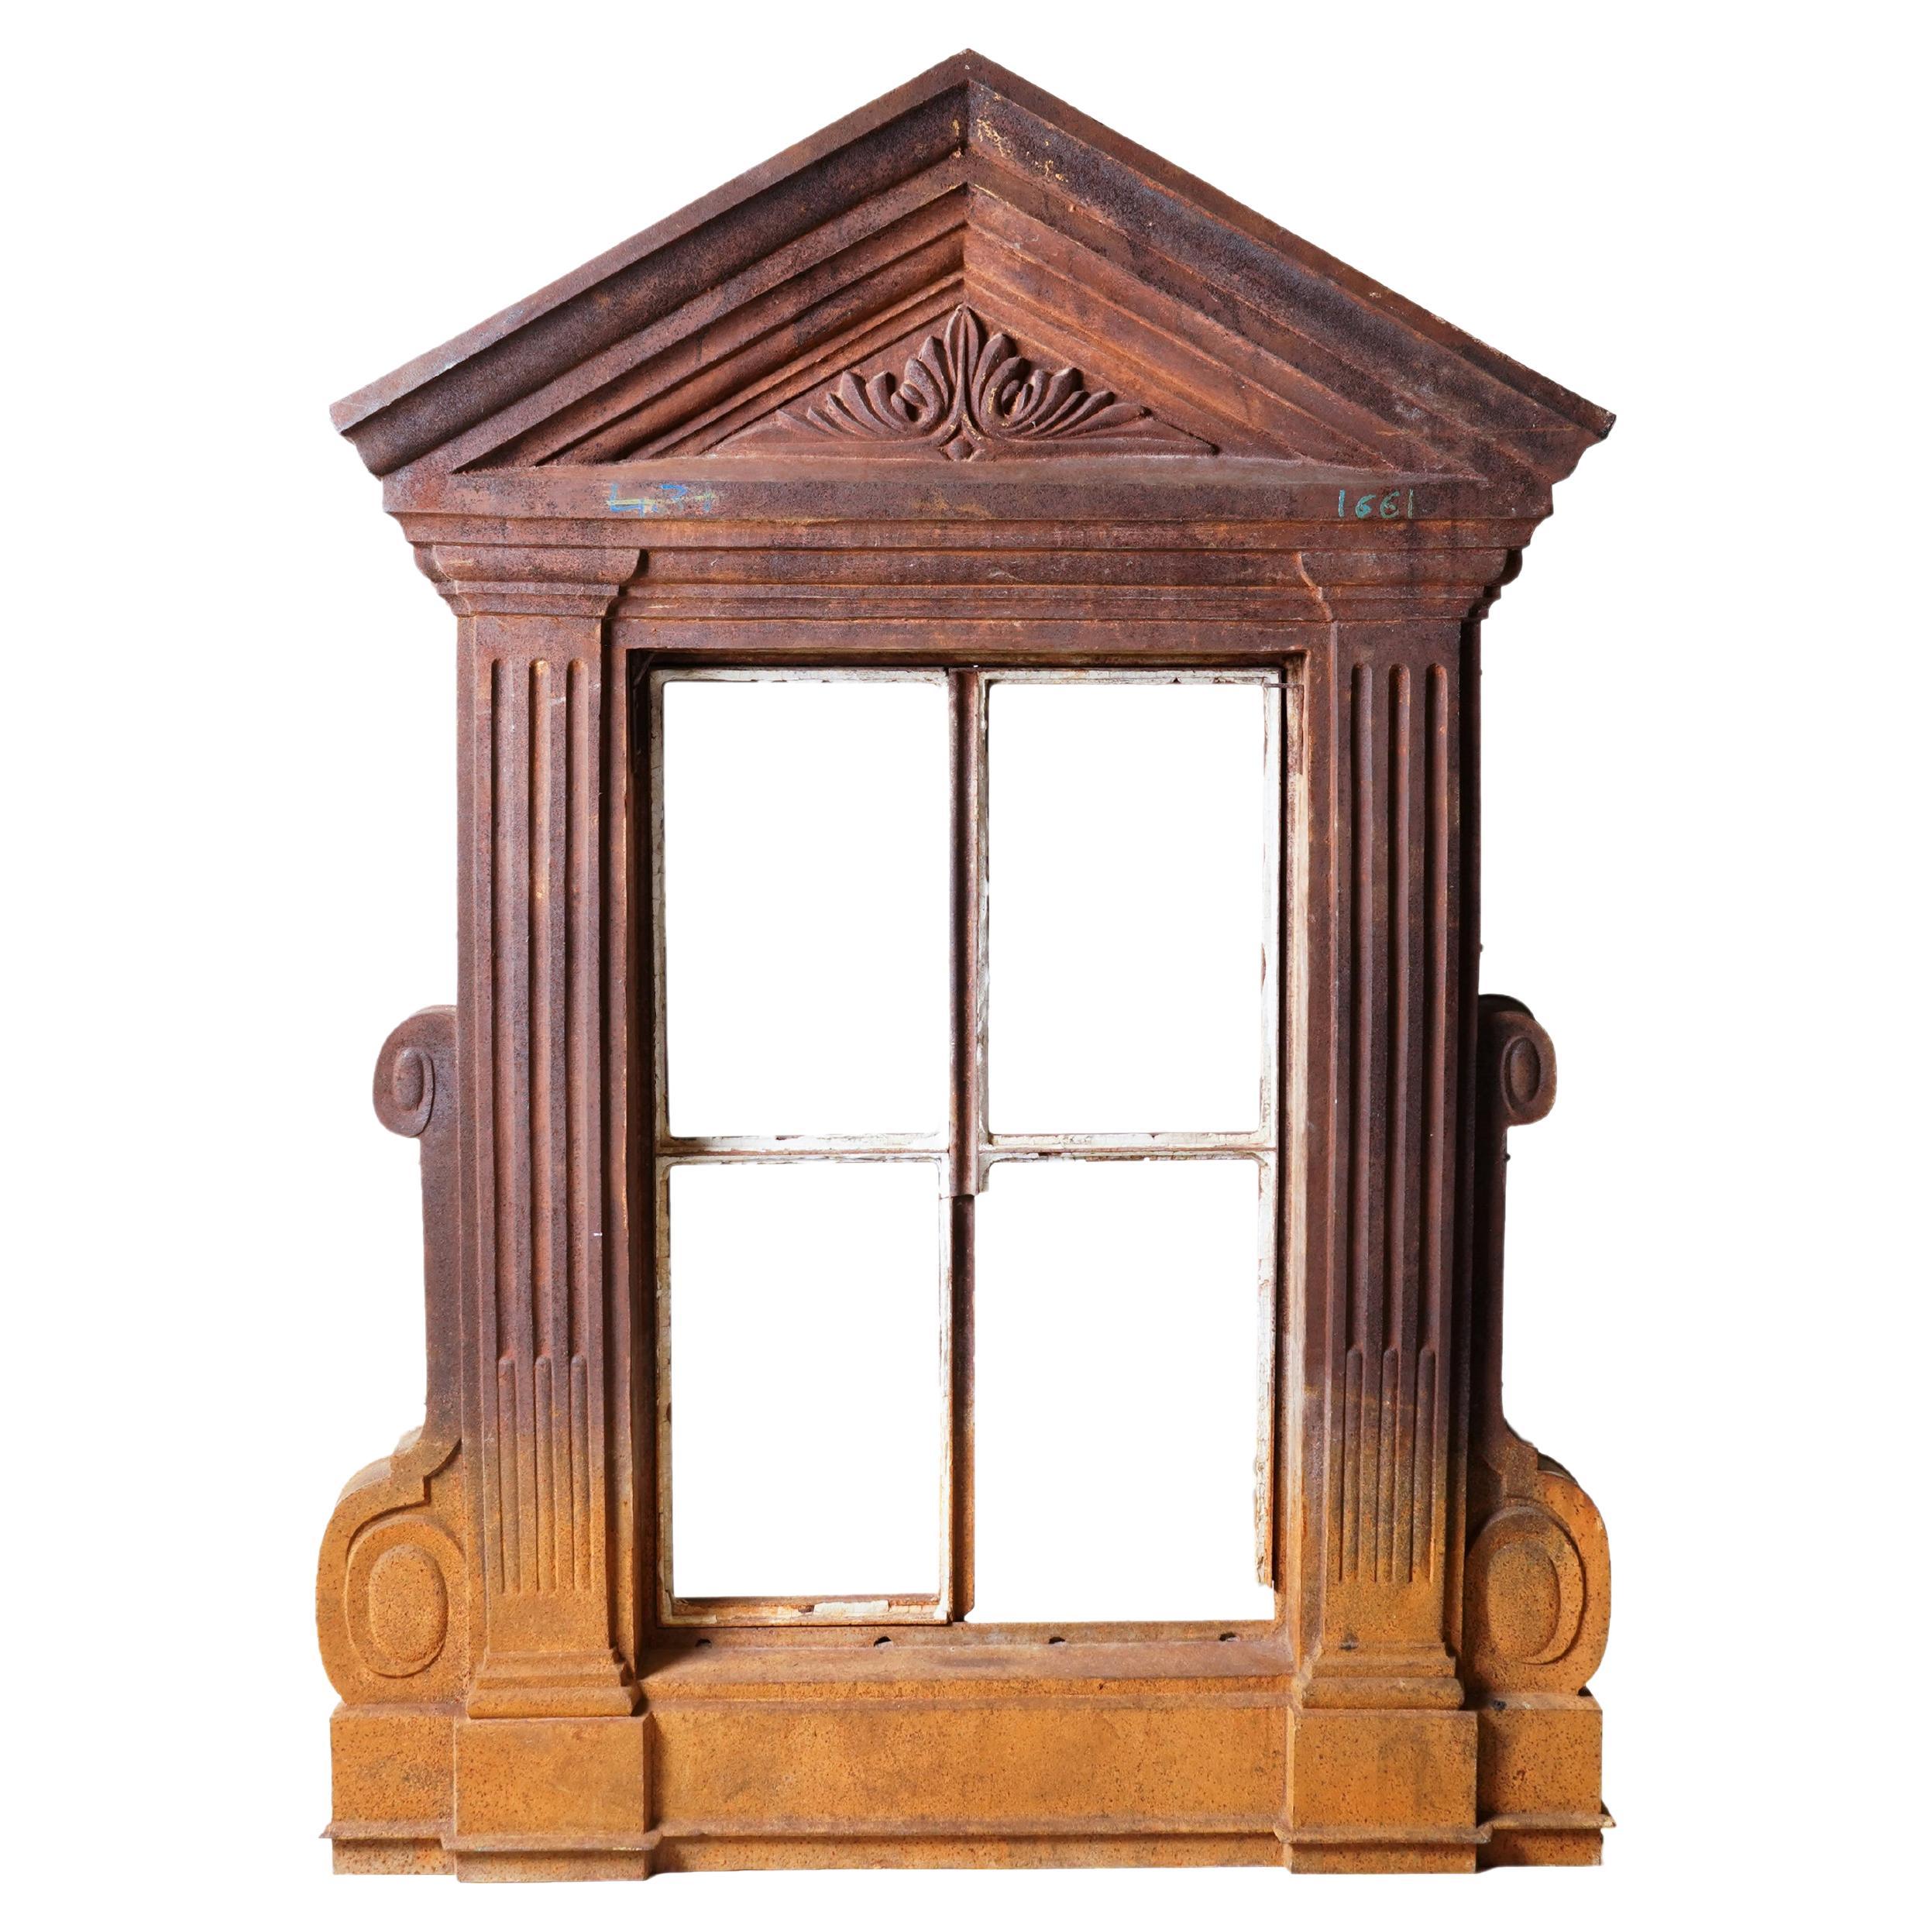 This monumental window frame once graced the upper story of a French apartment building, probably part of a dormer. The style is classical, with a stately pediment and fluted columns. The original paint has all washed off, leaving various shades of